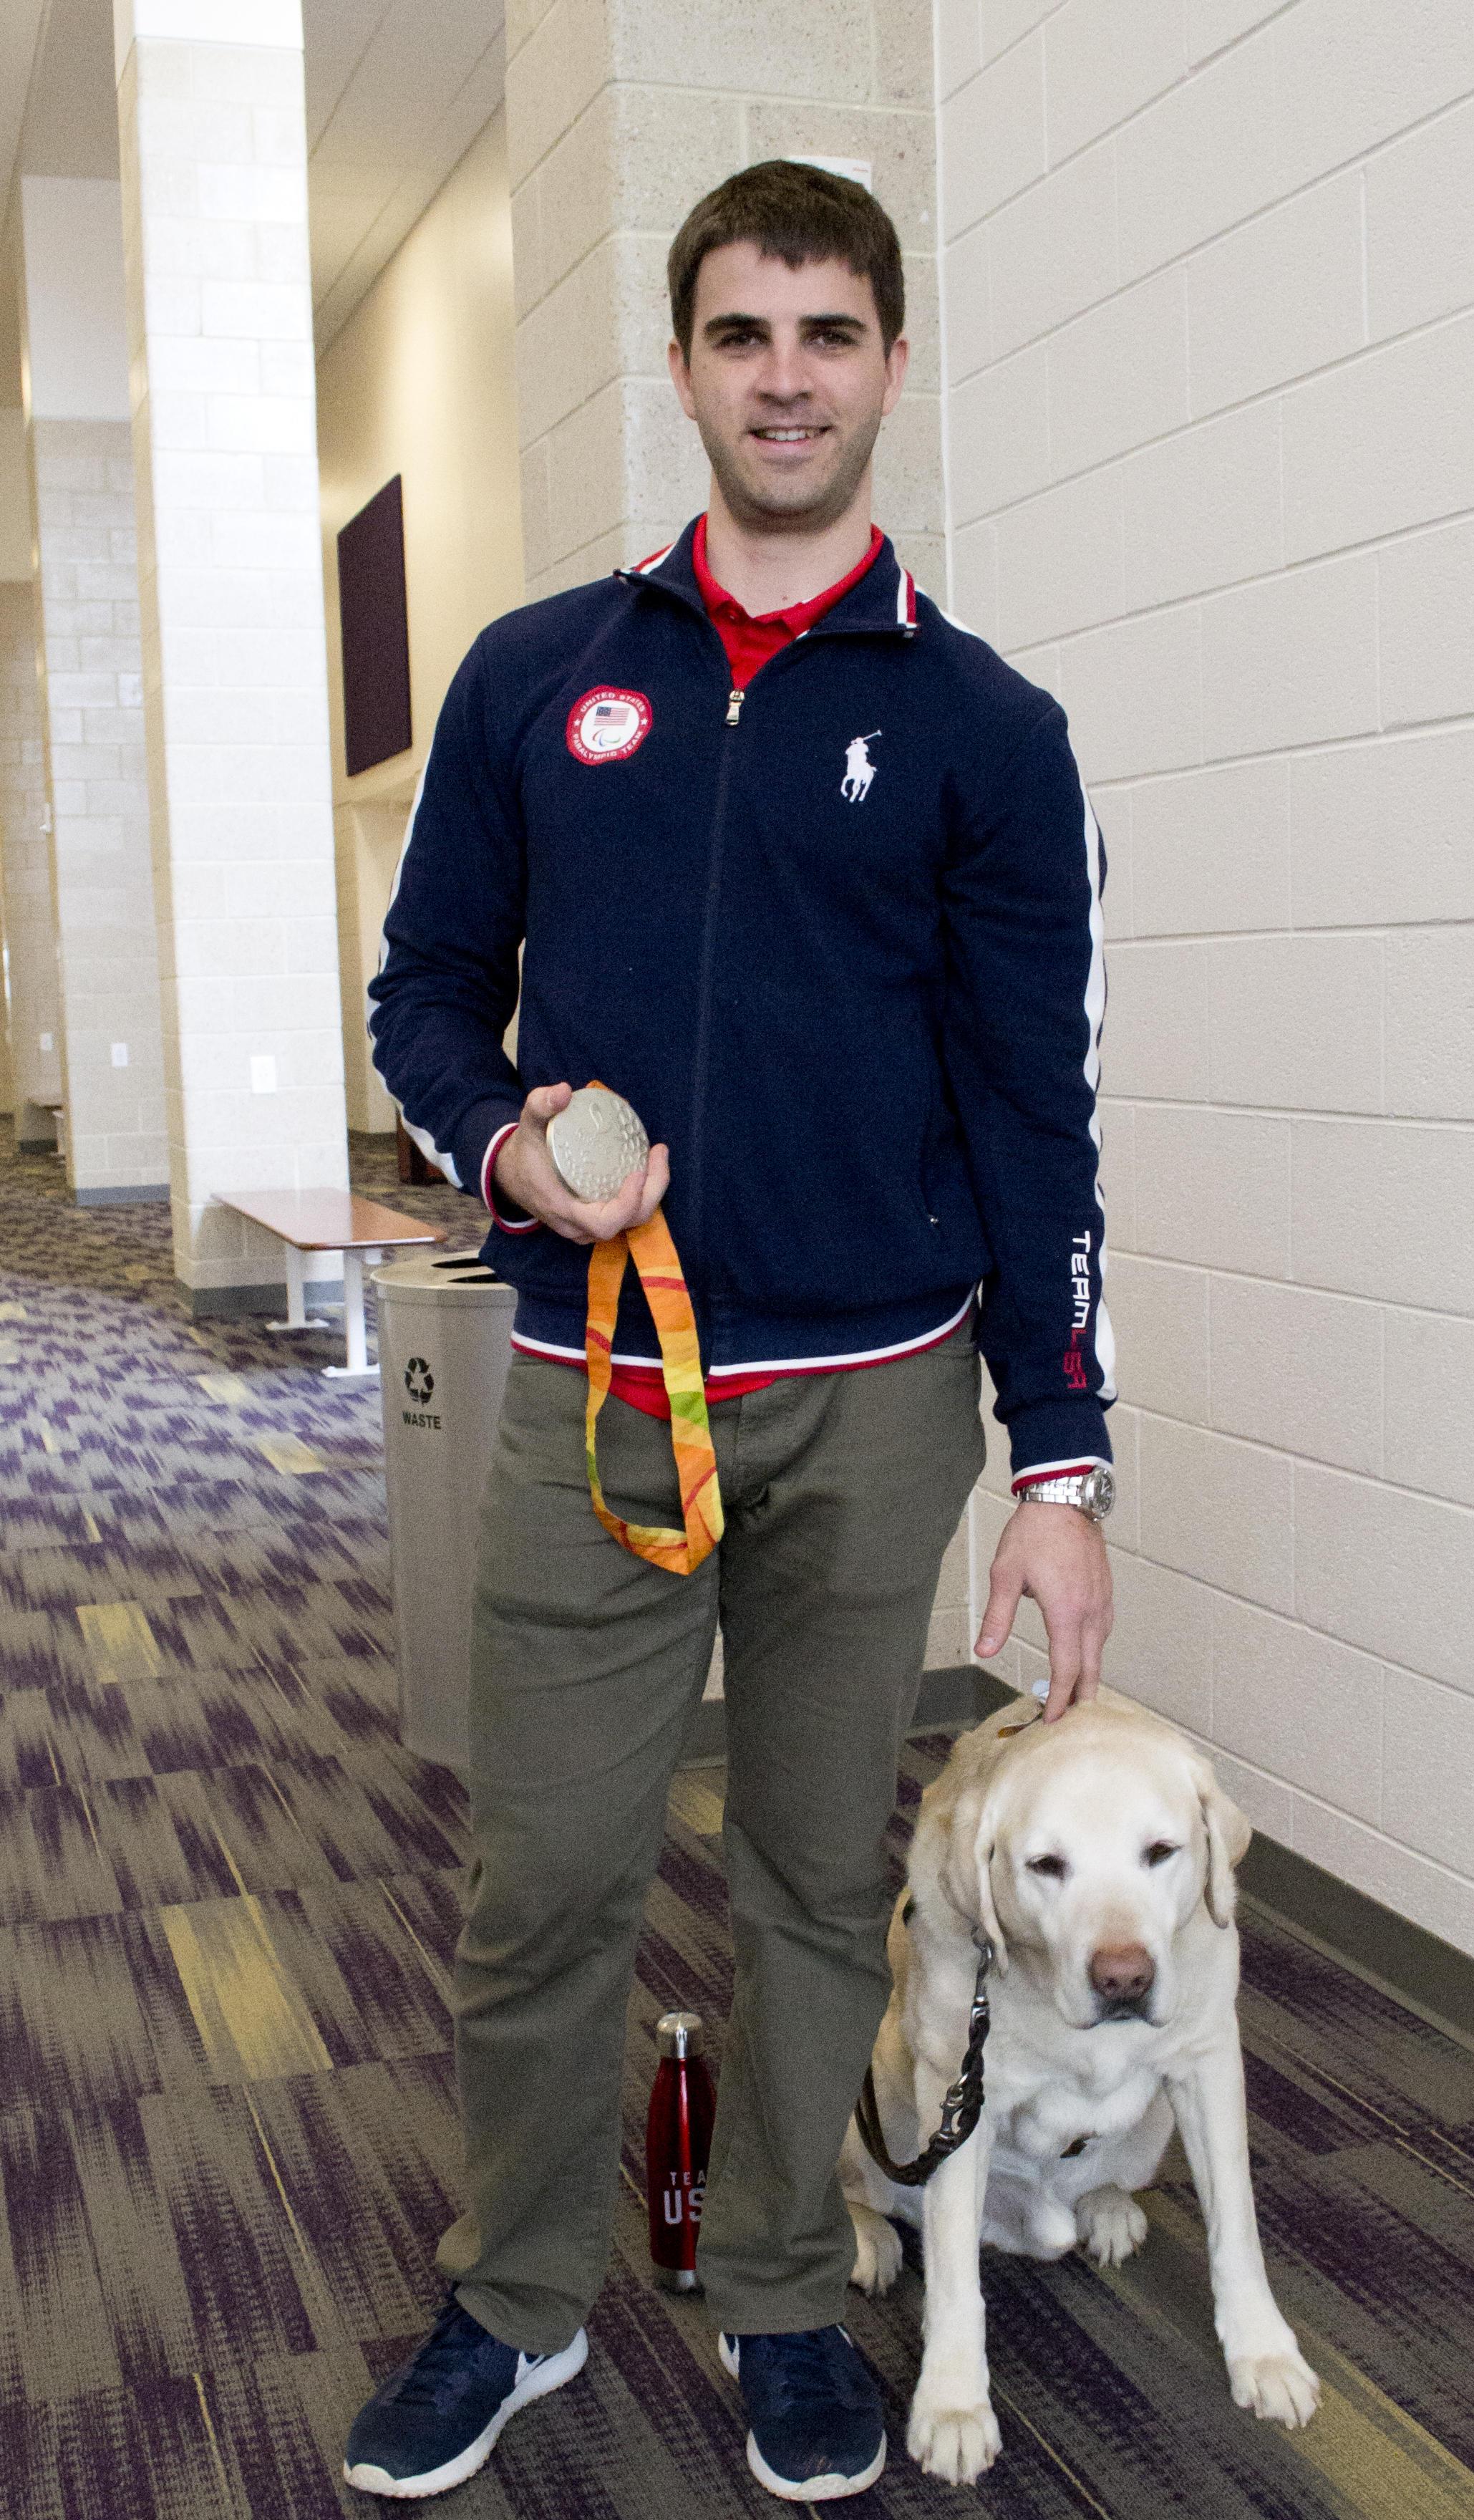 Paralympian Matt Simpson poses with his silver medal and his yellow Lab guide dog, Lacrosse.